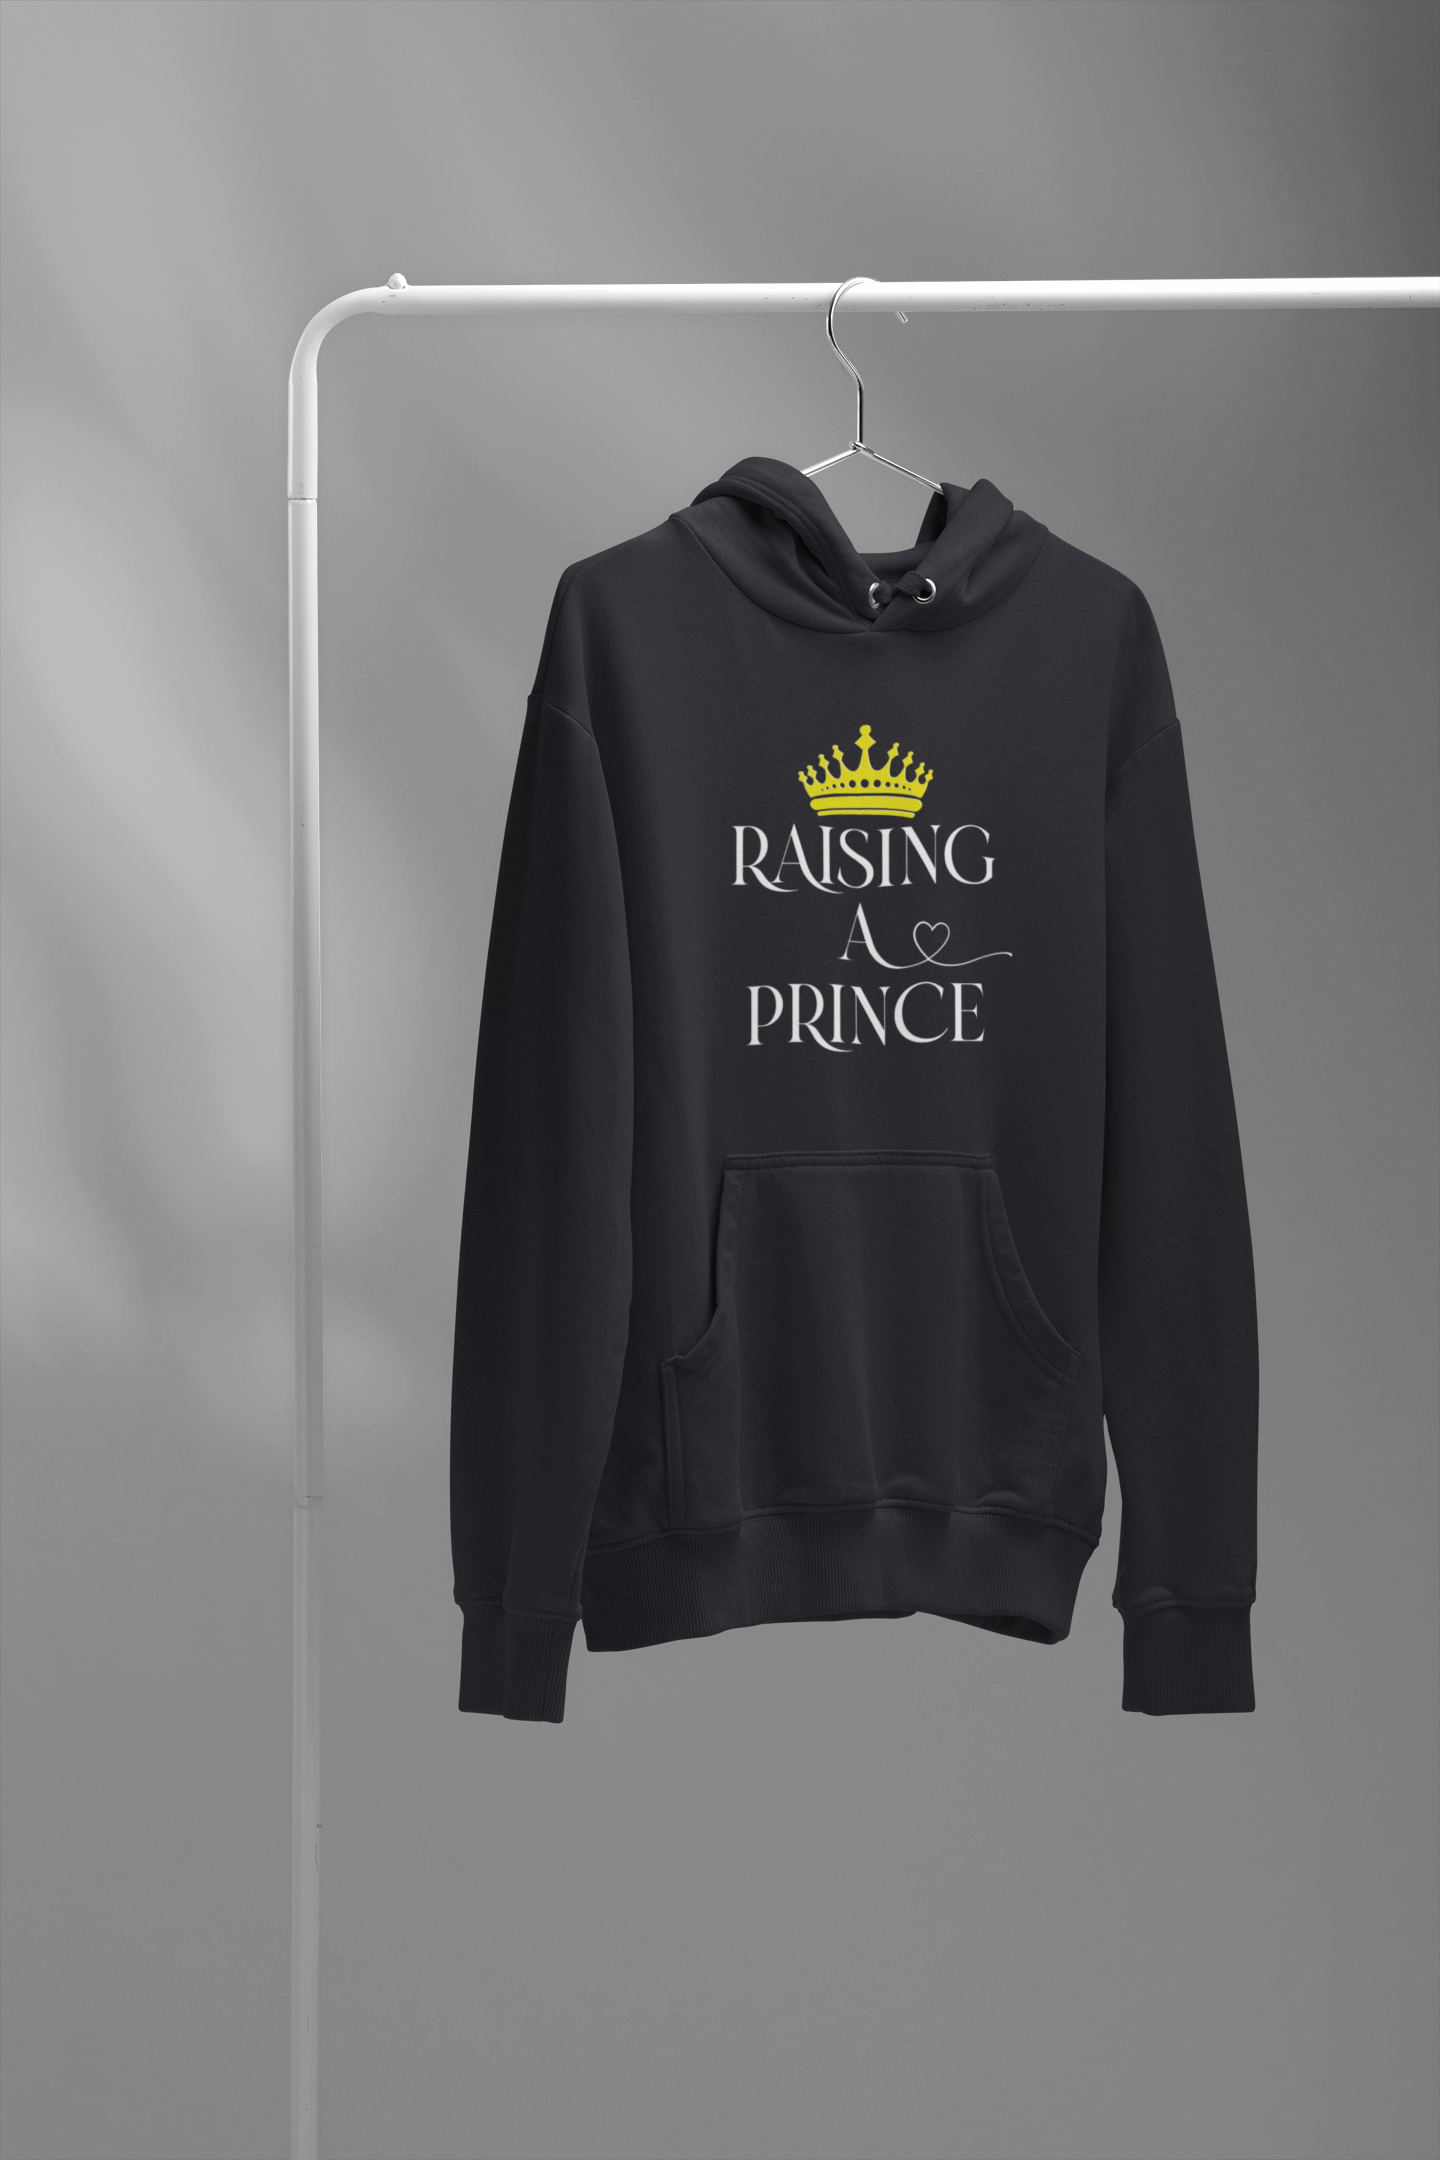 Raised By A King Father and Son Black Matching Hoodies- FunkyTeesClub